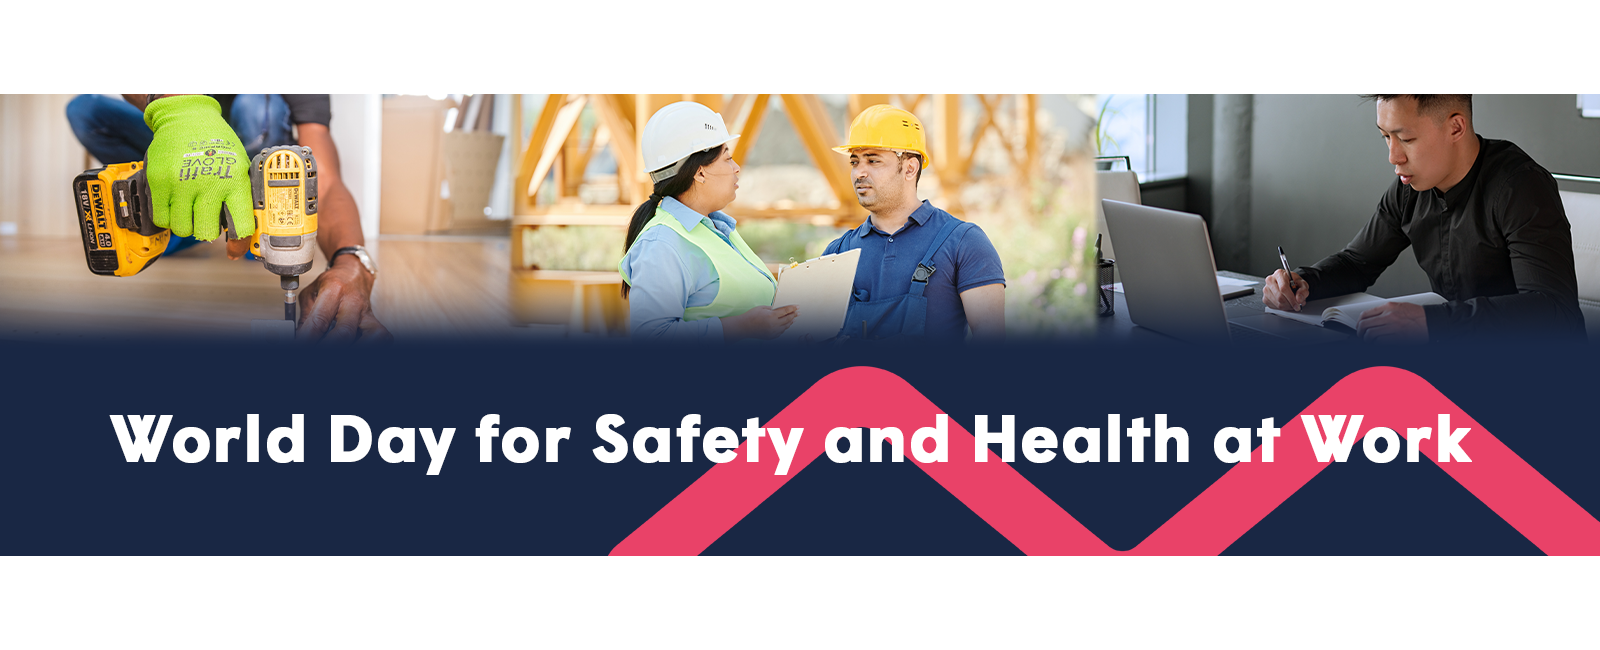 Safety and health at work web header2